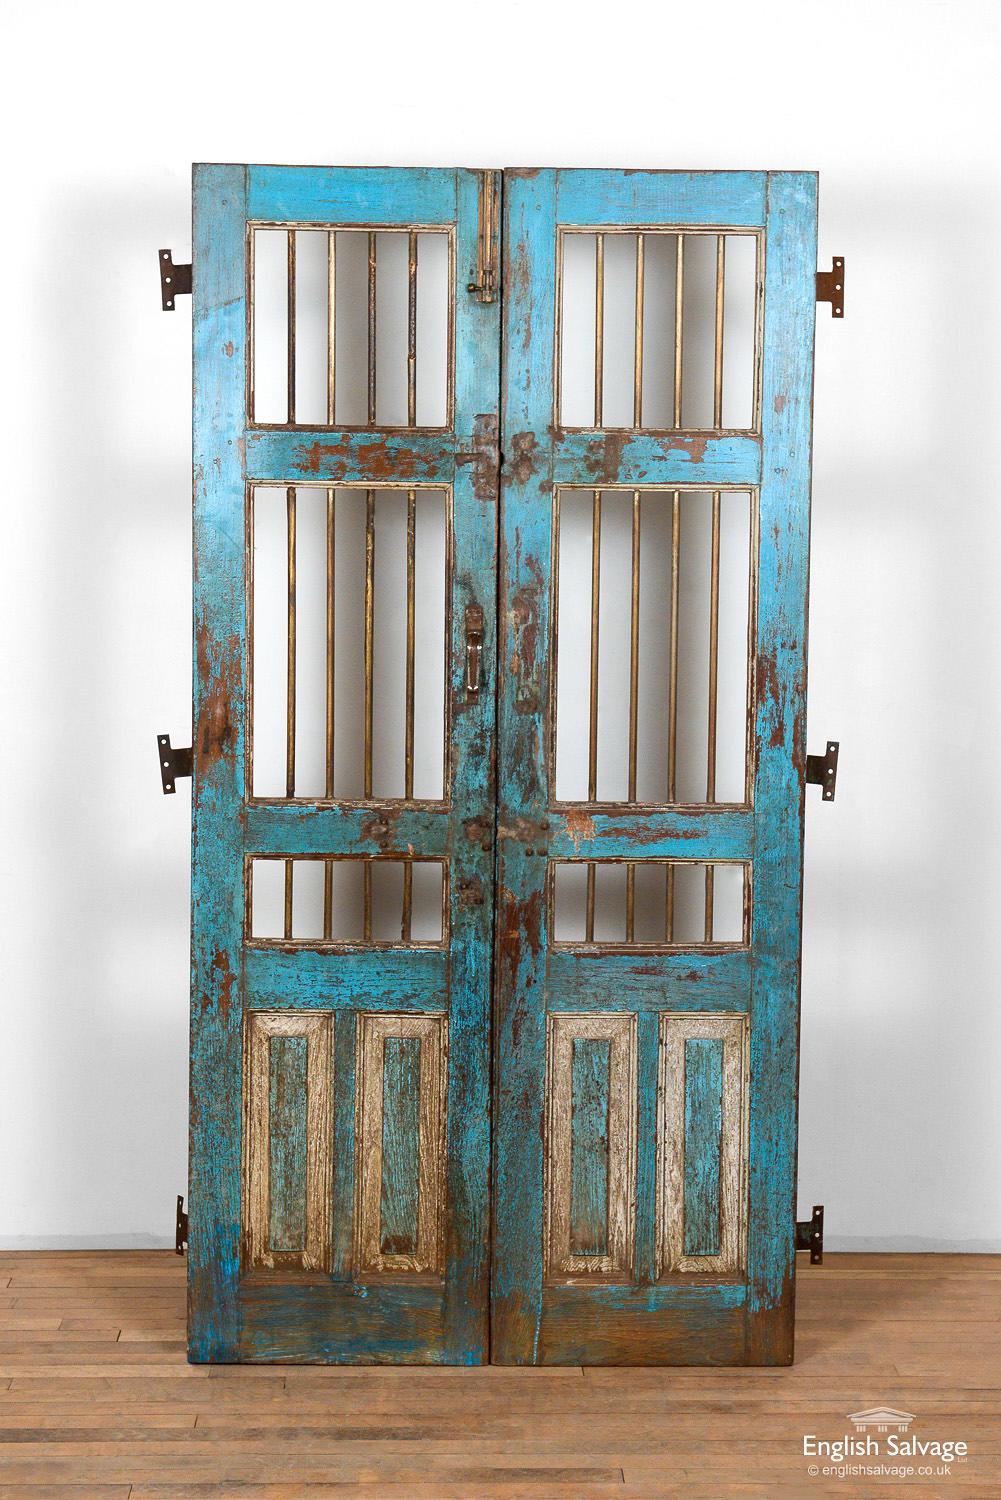 Antique salvaged Jali doors from India. Worn light blue paint with white detail to the lower fielded panels gives the doors a weathered appearance and a beautiful patina. Each door has three rusty metal hinges to the outer edge and metal bars to the